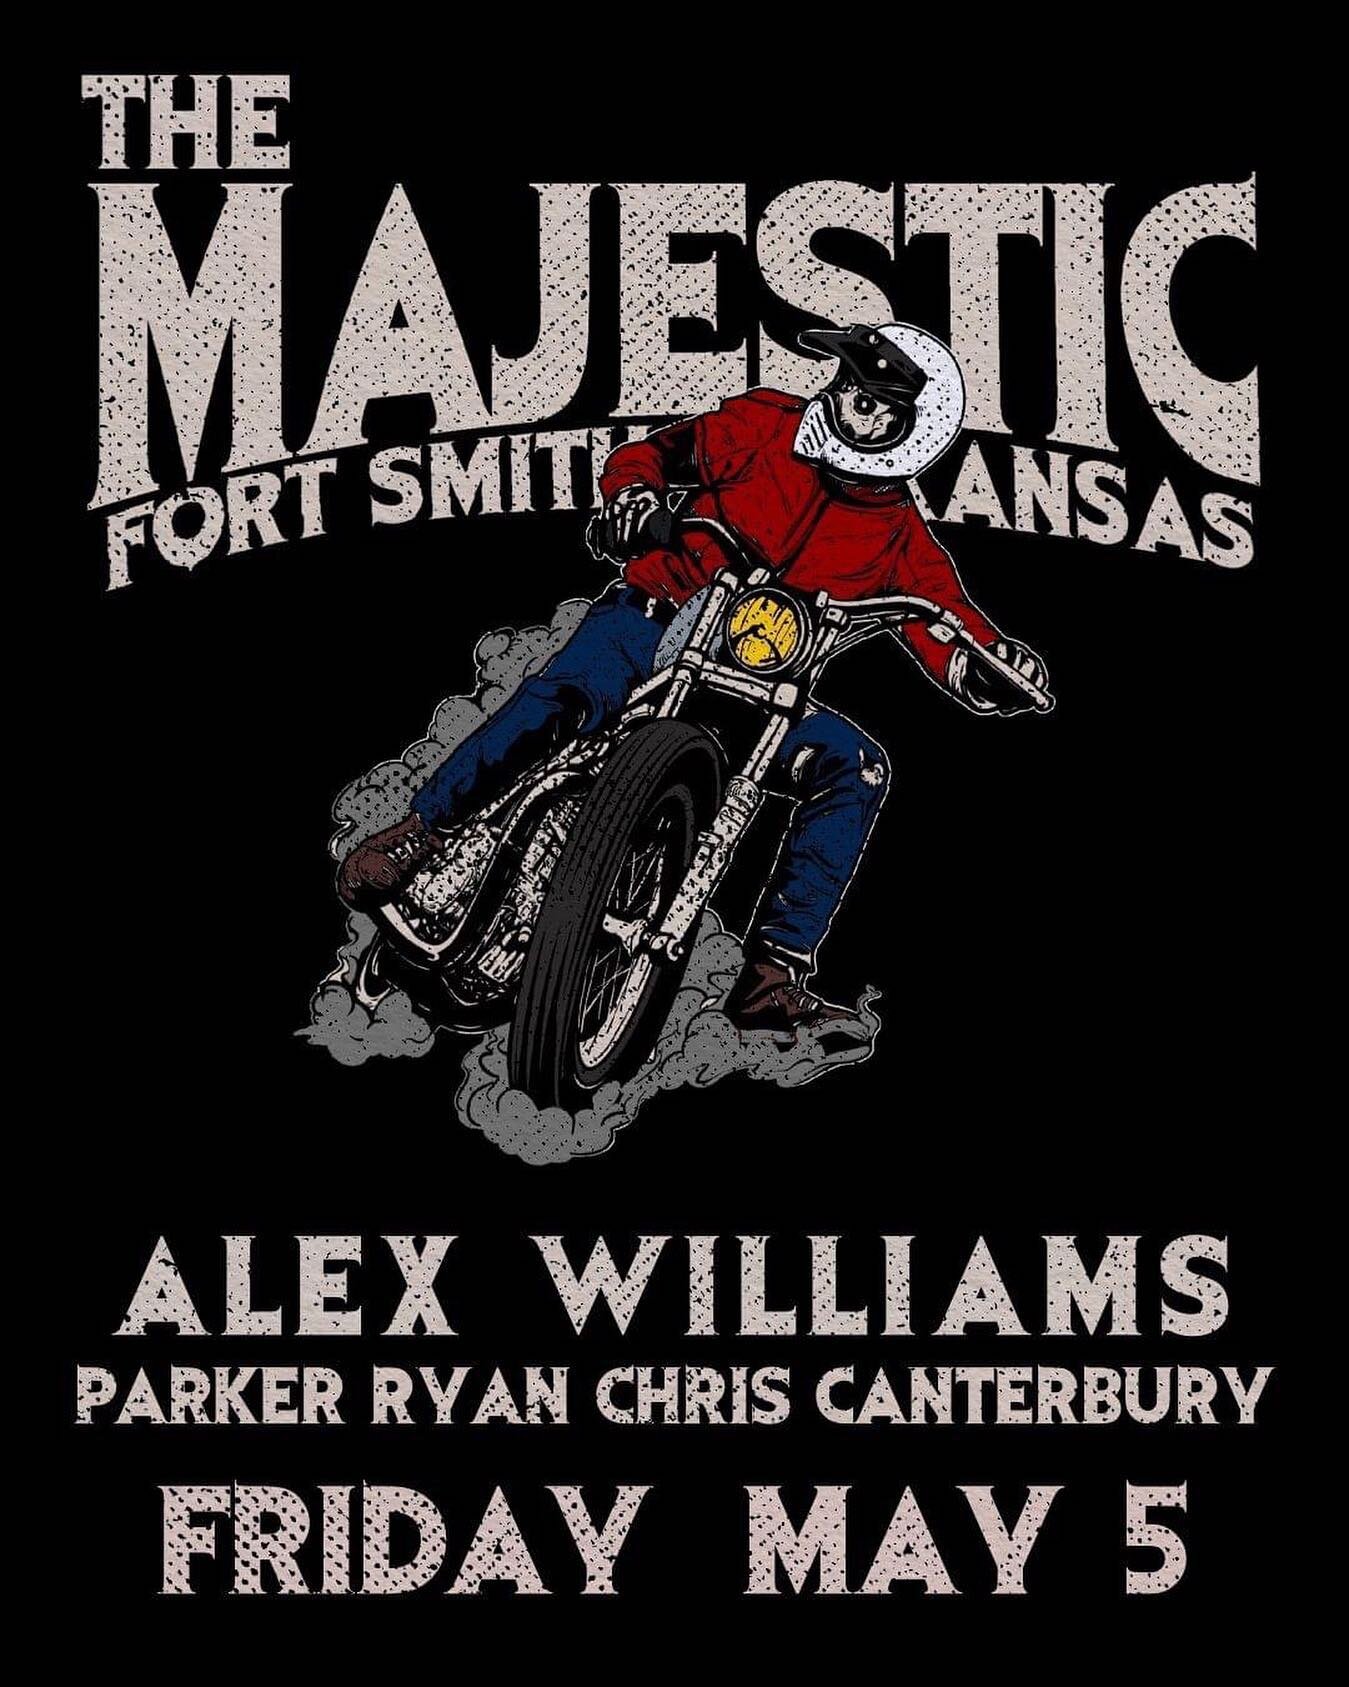 Looking forward to being back in Ft Smith at the @majesticfortsmith on May 5 with @alexwilliams_official and @parker_ryannn